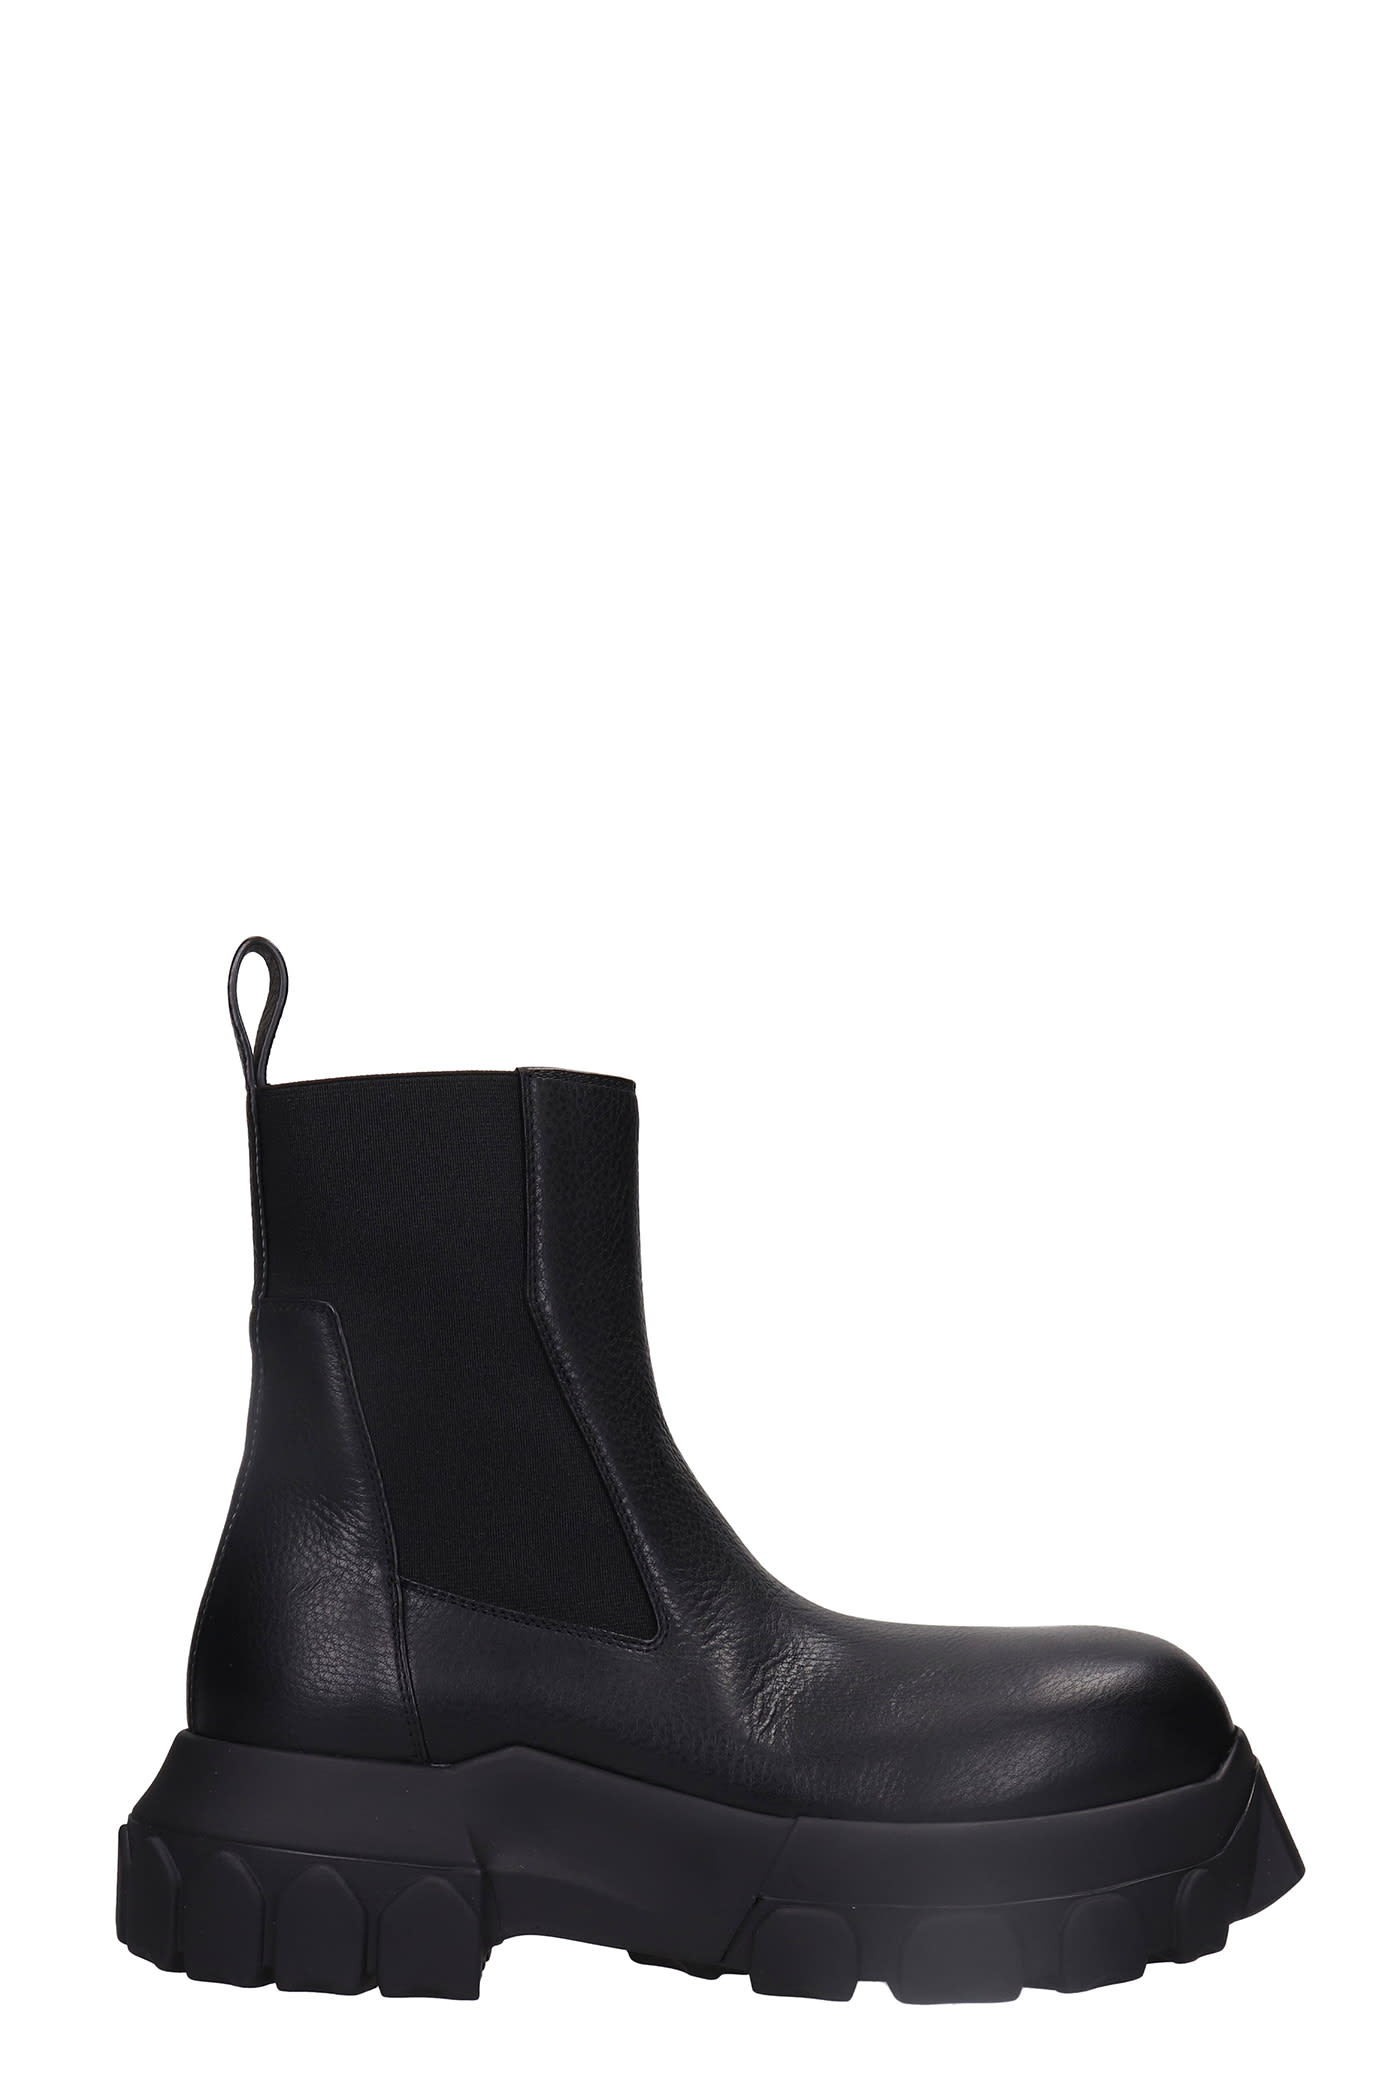 Rick Owens Beatle Bozo Combat Boots In Black Leather